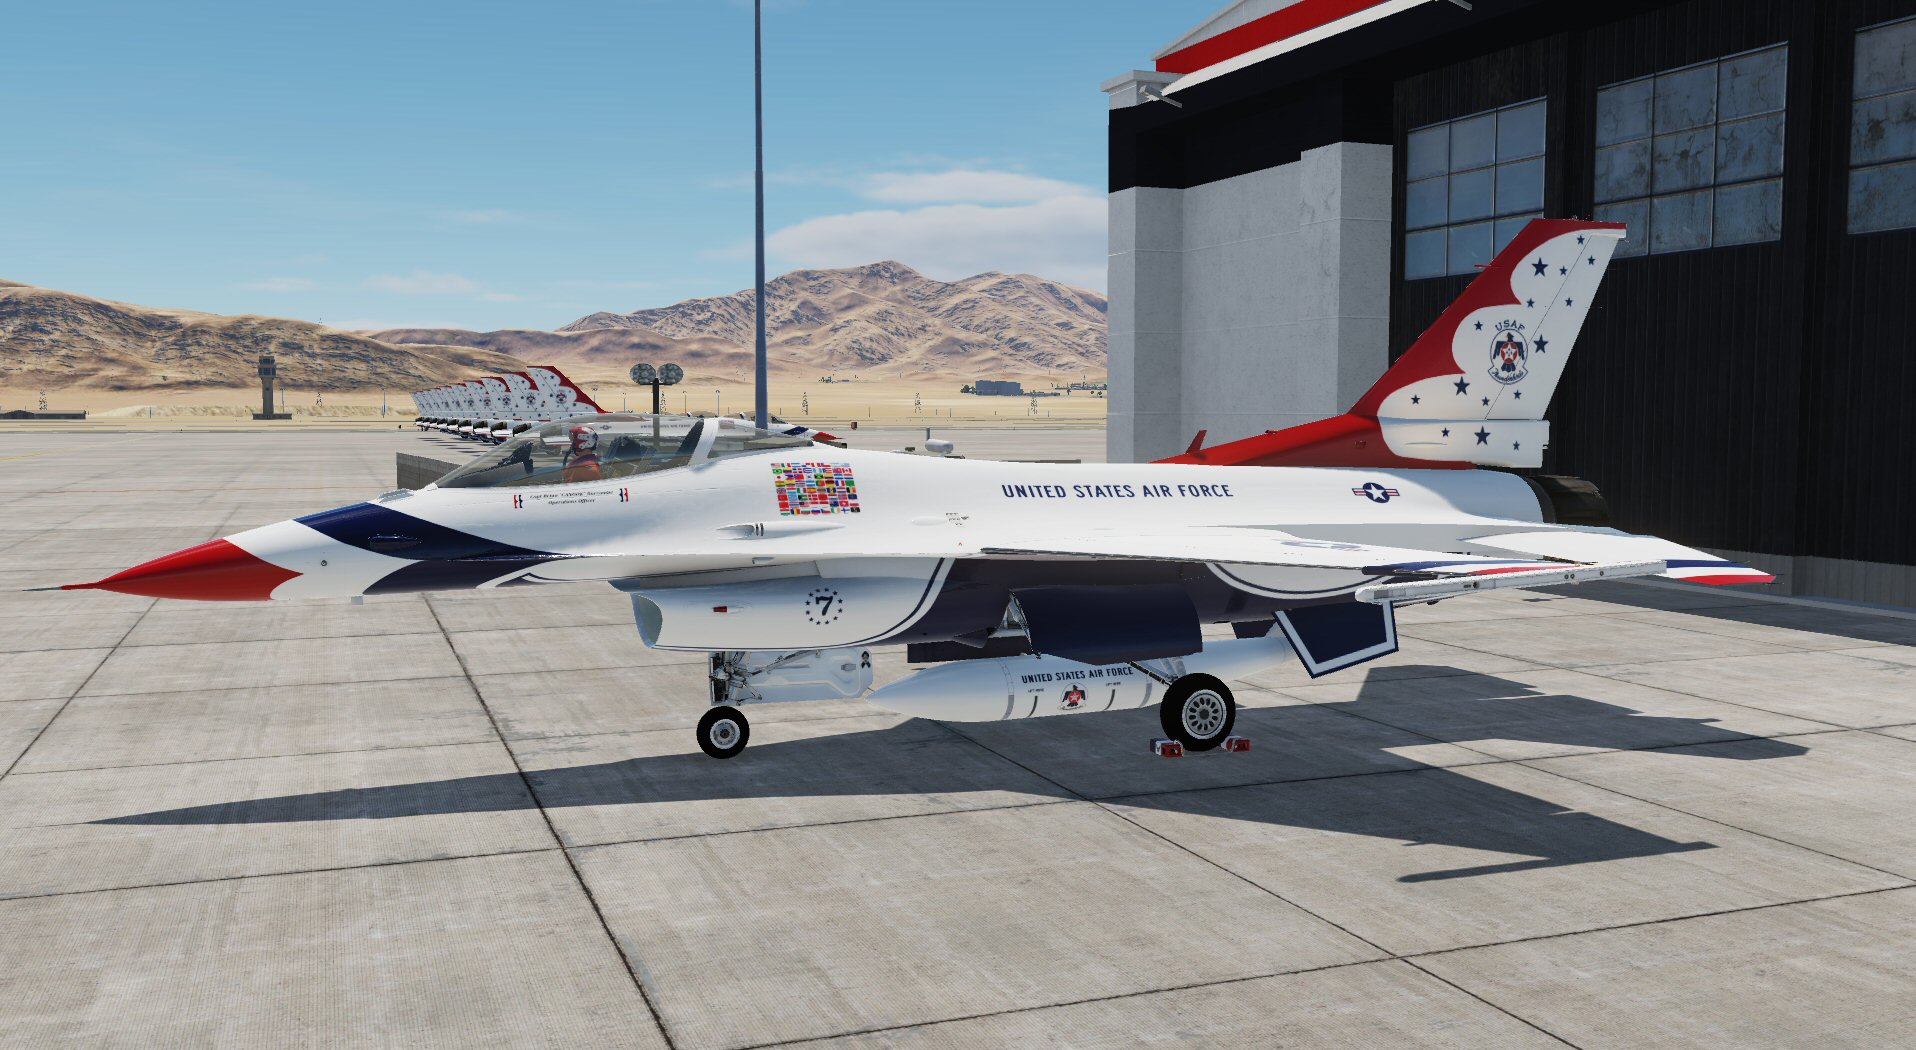 USAF Thunderbirds Team Set #0-9 plus two alternate Thunderbirds, all with the Iconic Thunderbird helmet, custom fuel tanks, travel pods & two Mission files are all Included.